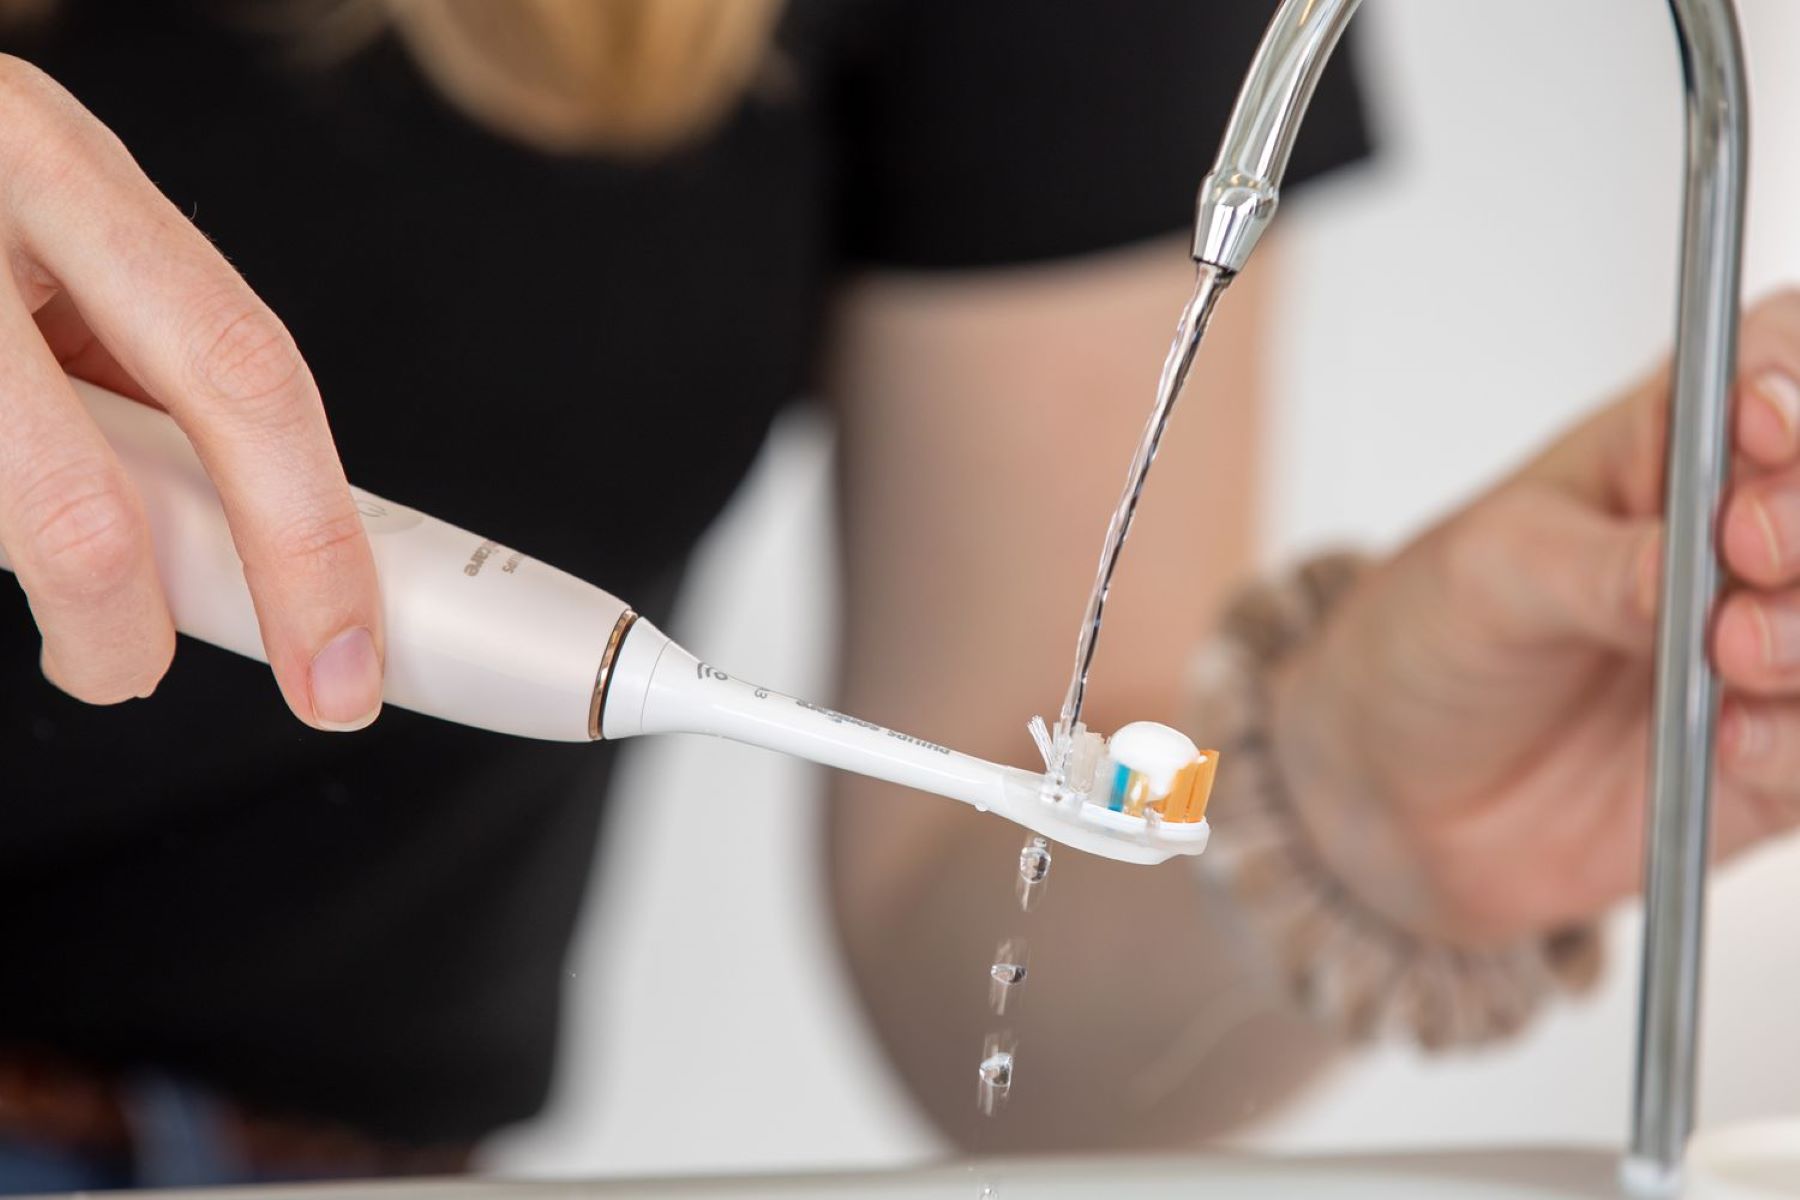 How To Change Sonicare Toothbrush Head